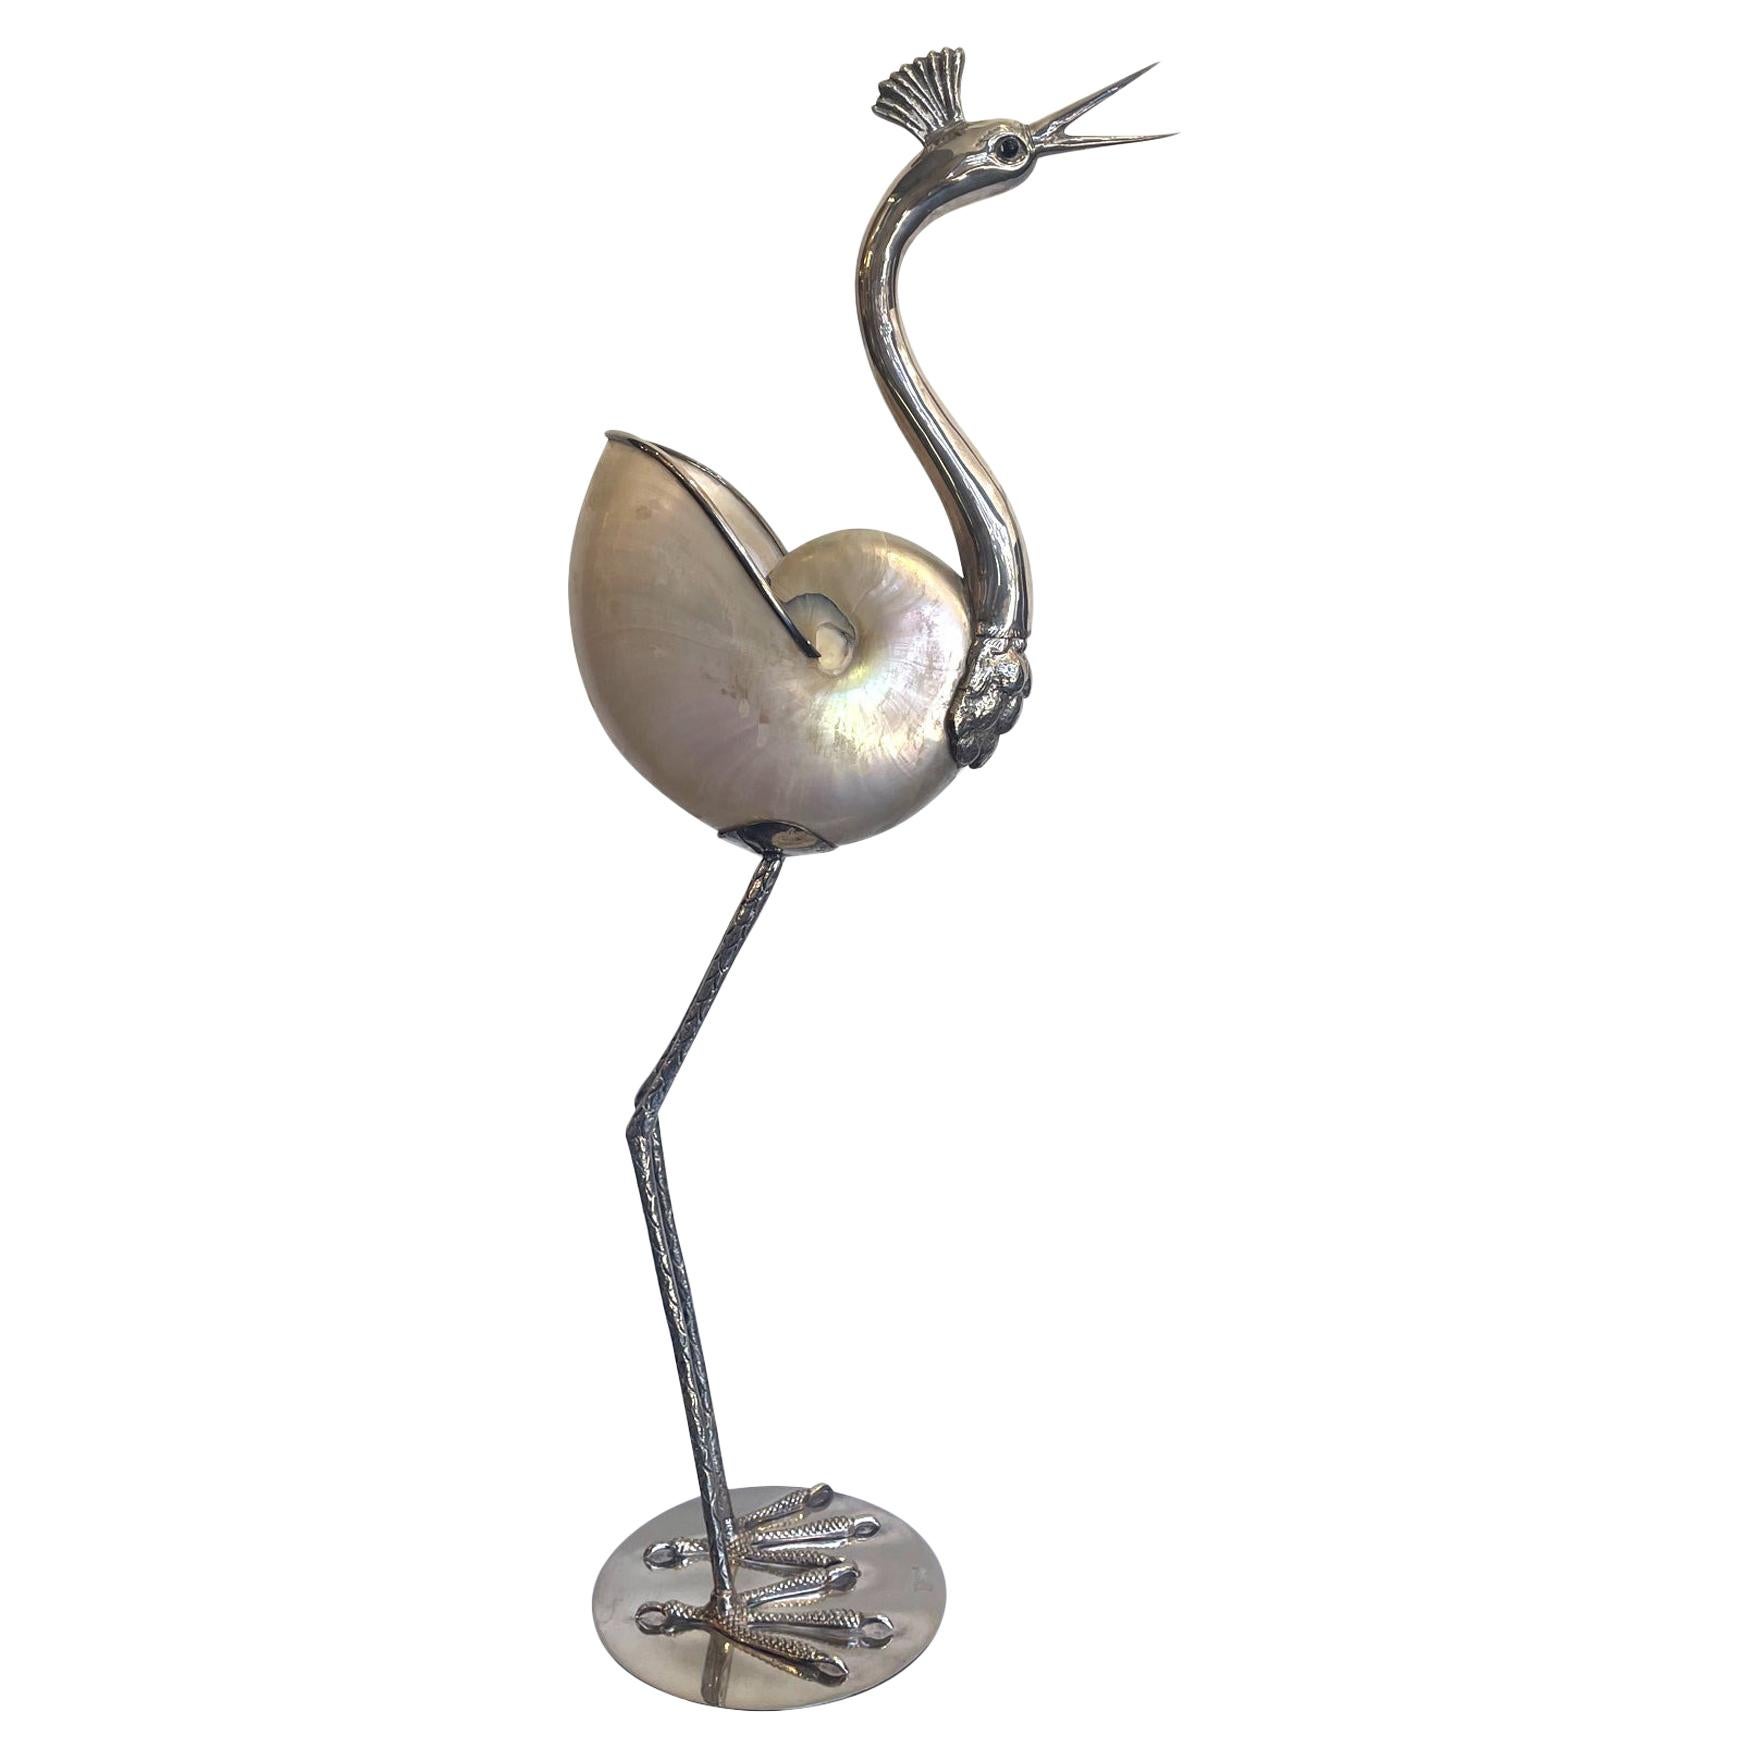 1970's Silver Plated Crane by Gabriella Binazzi with Real Nautilus Shell Body